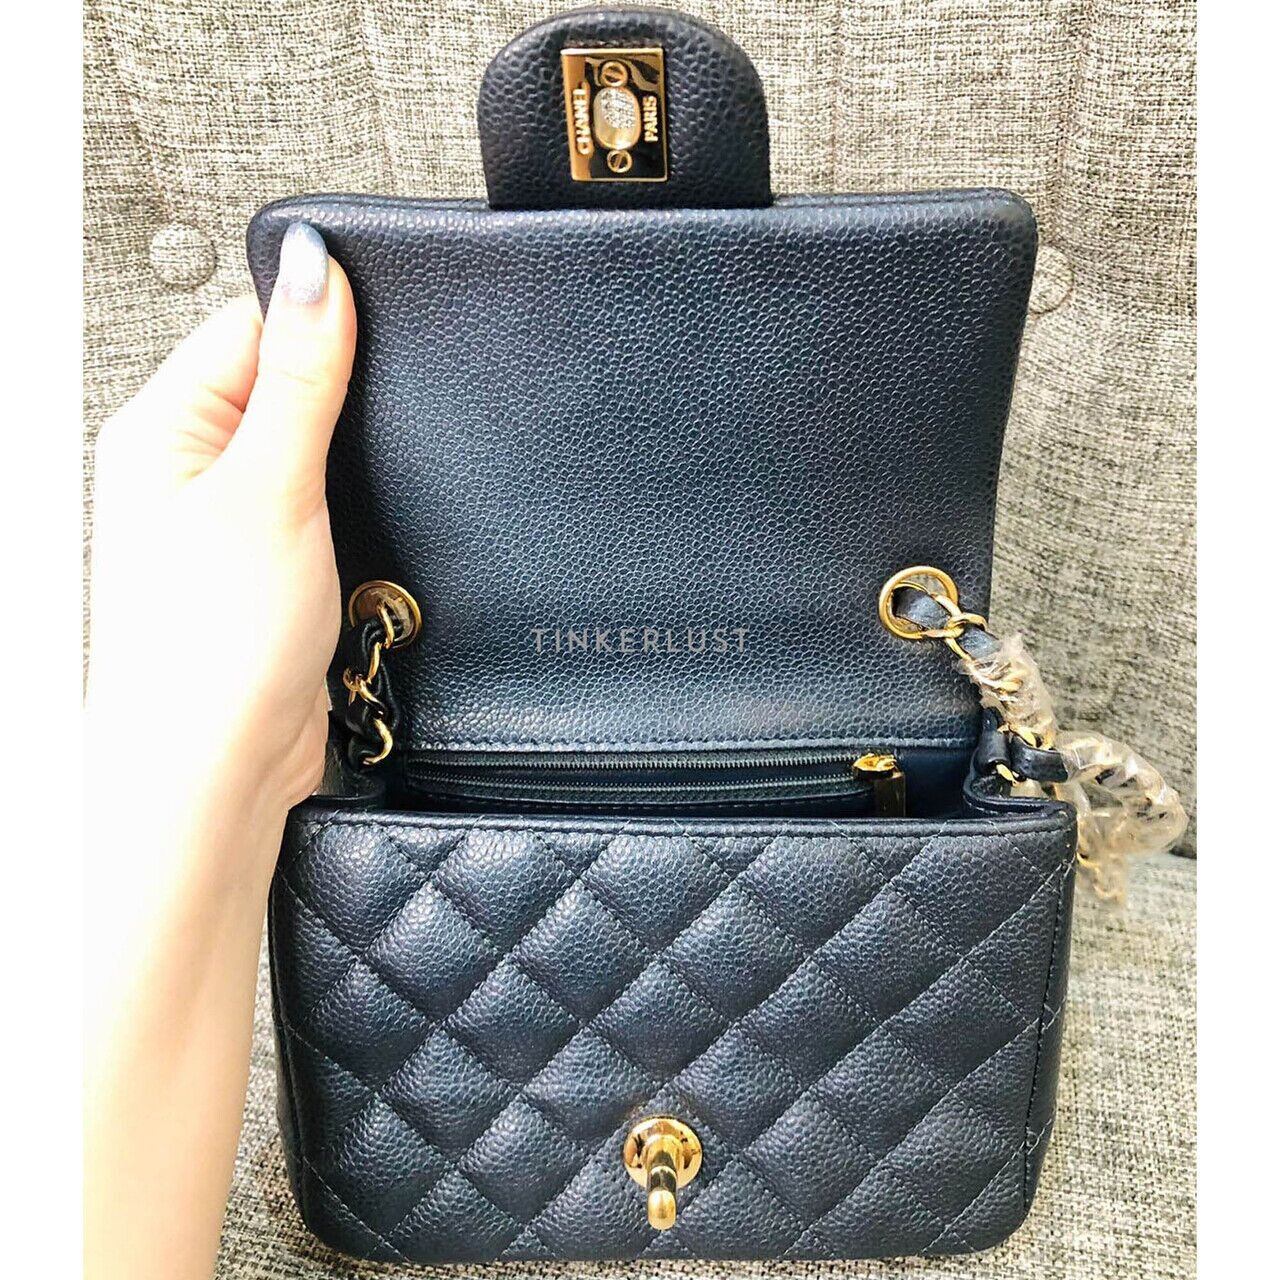 Chanel Mini Square Pearly Blue Iridescent #25 Sling Bag 